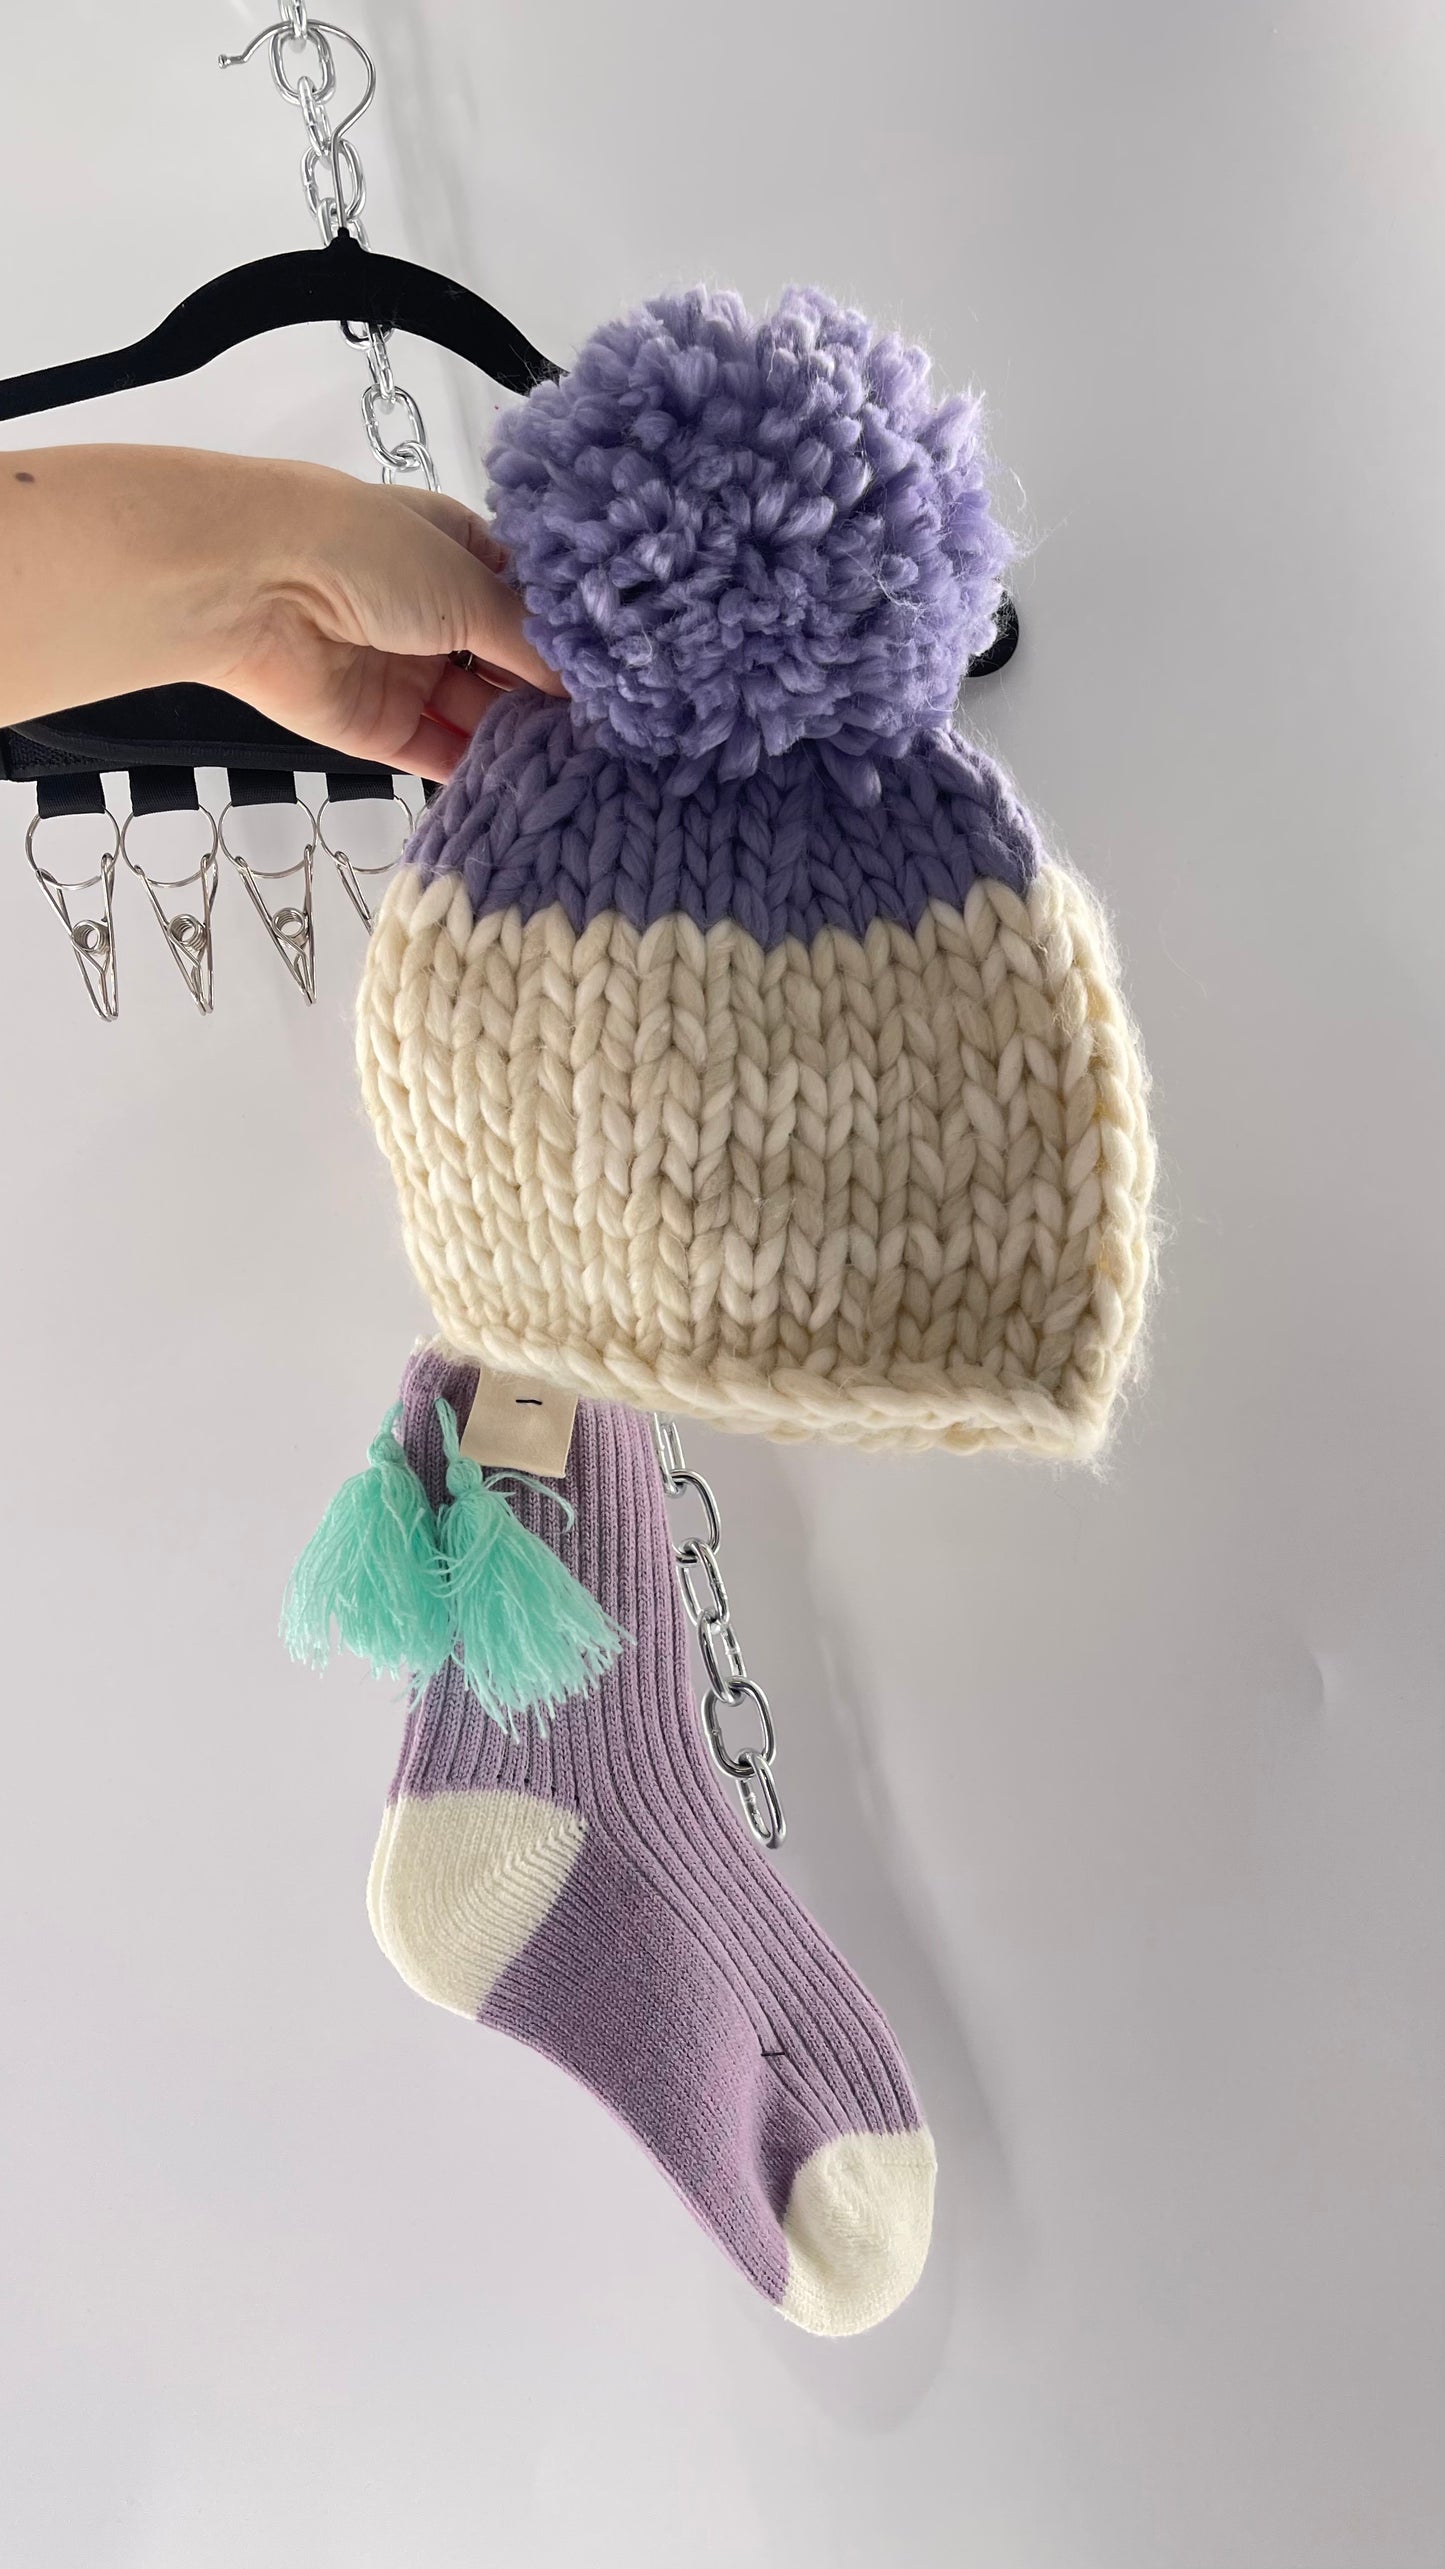 Free People Lavender Purple and White Knit Beanie and Sock Set